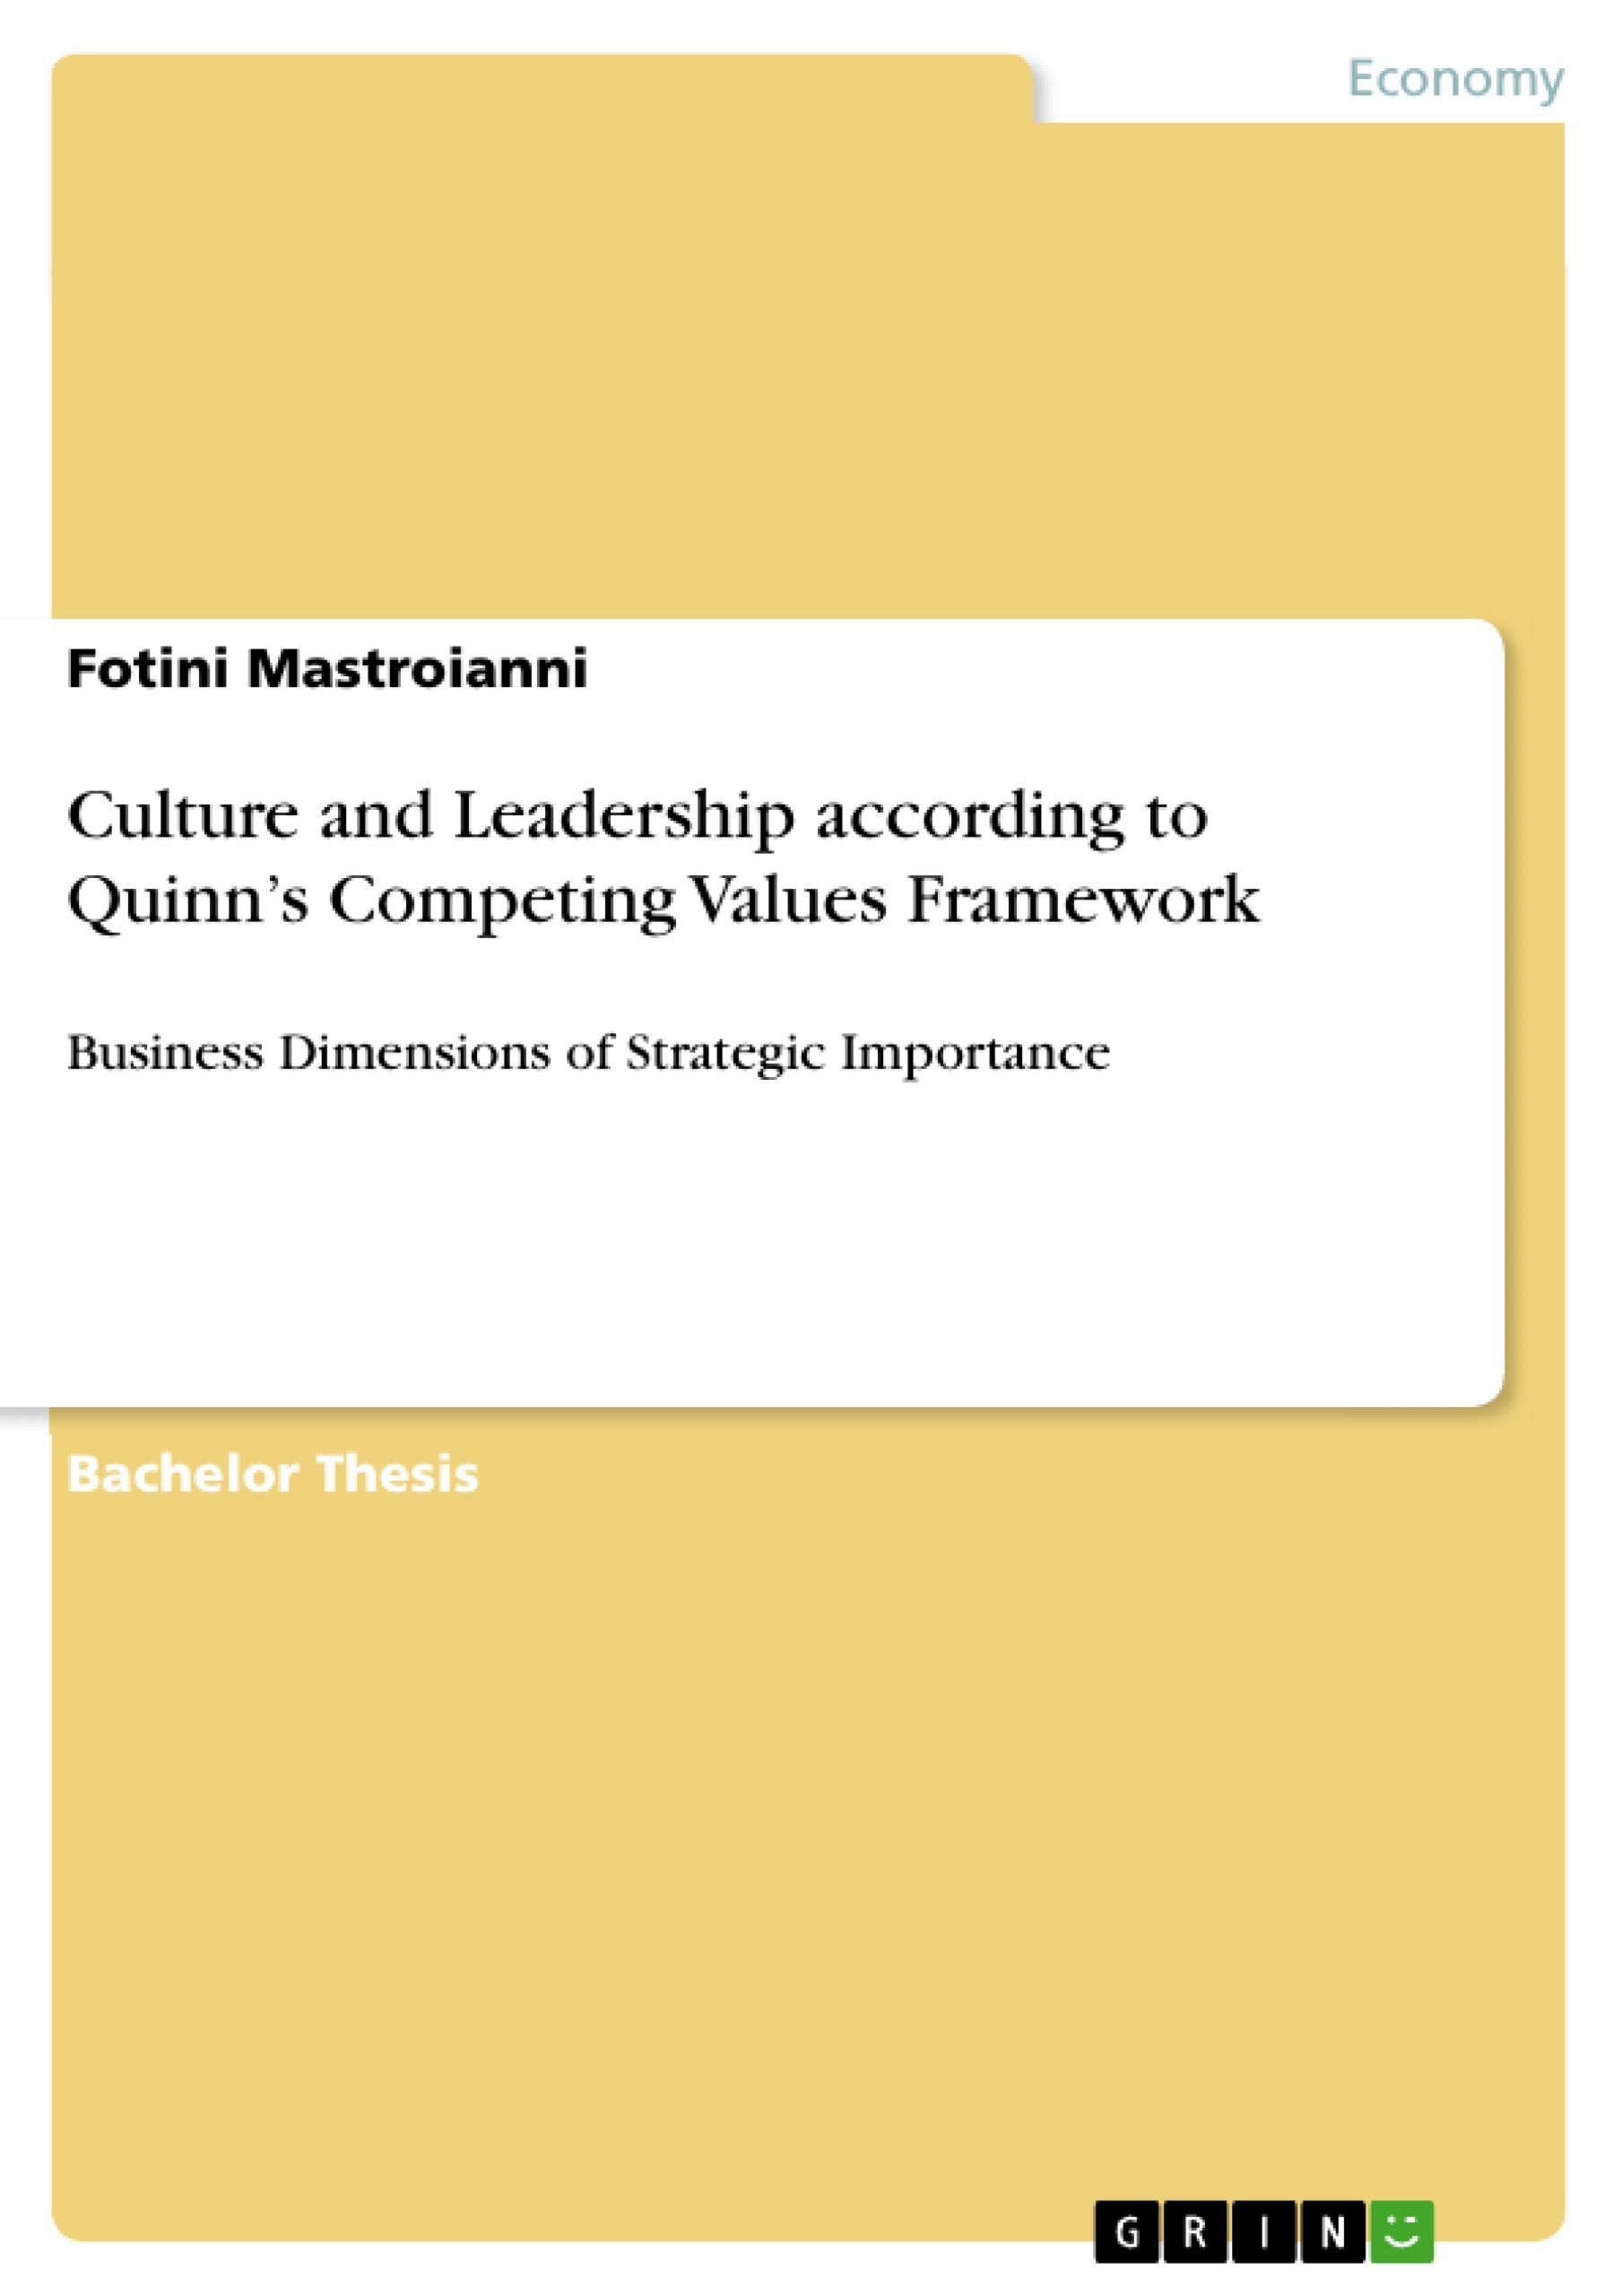 Titre: Culture and Leadership according to Quinn’s Competing Values Framework